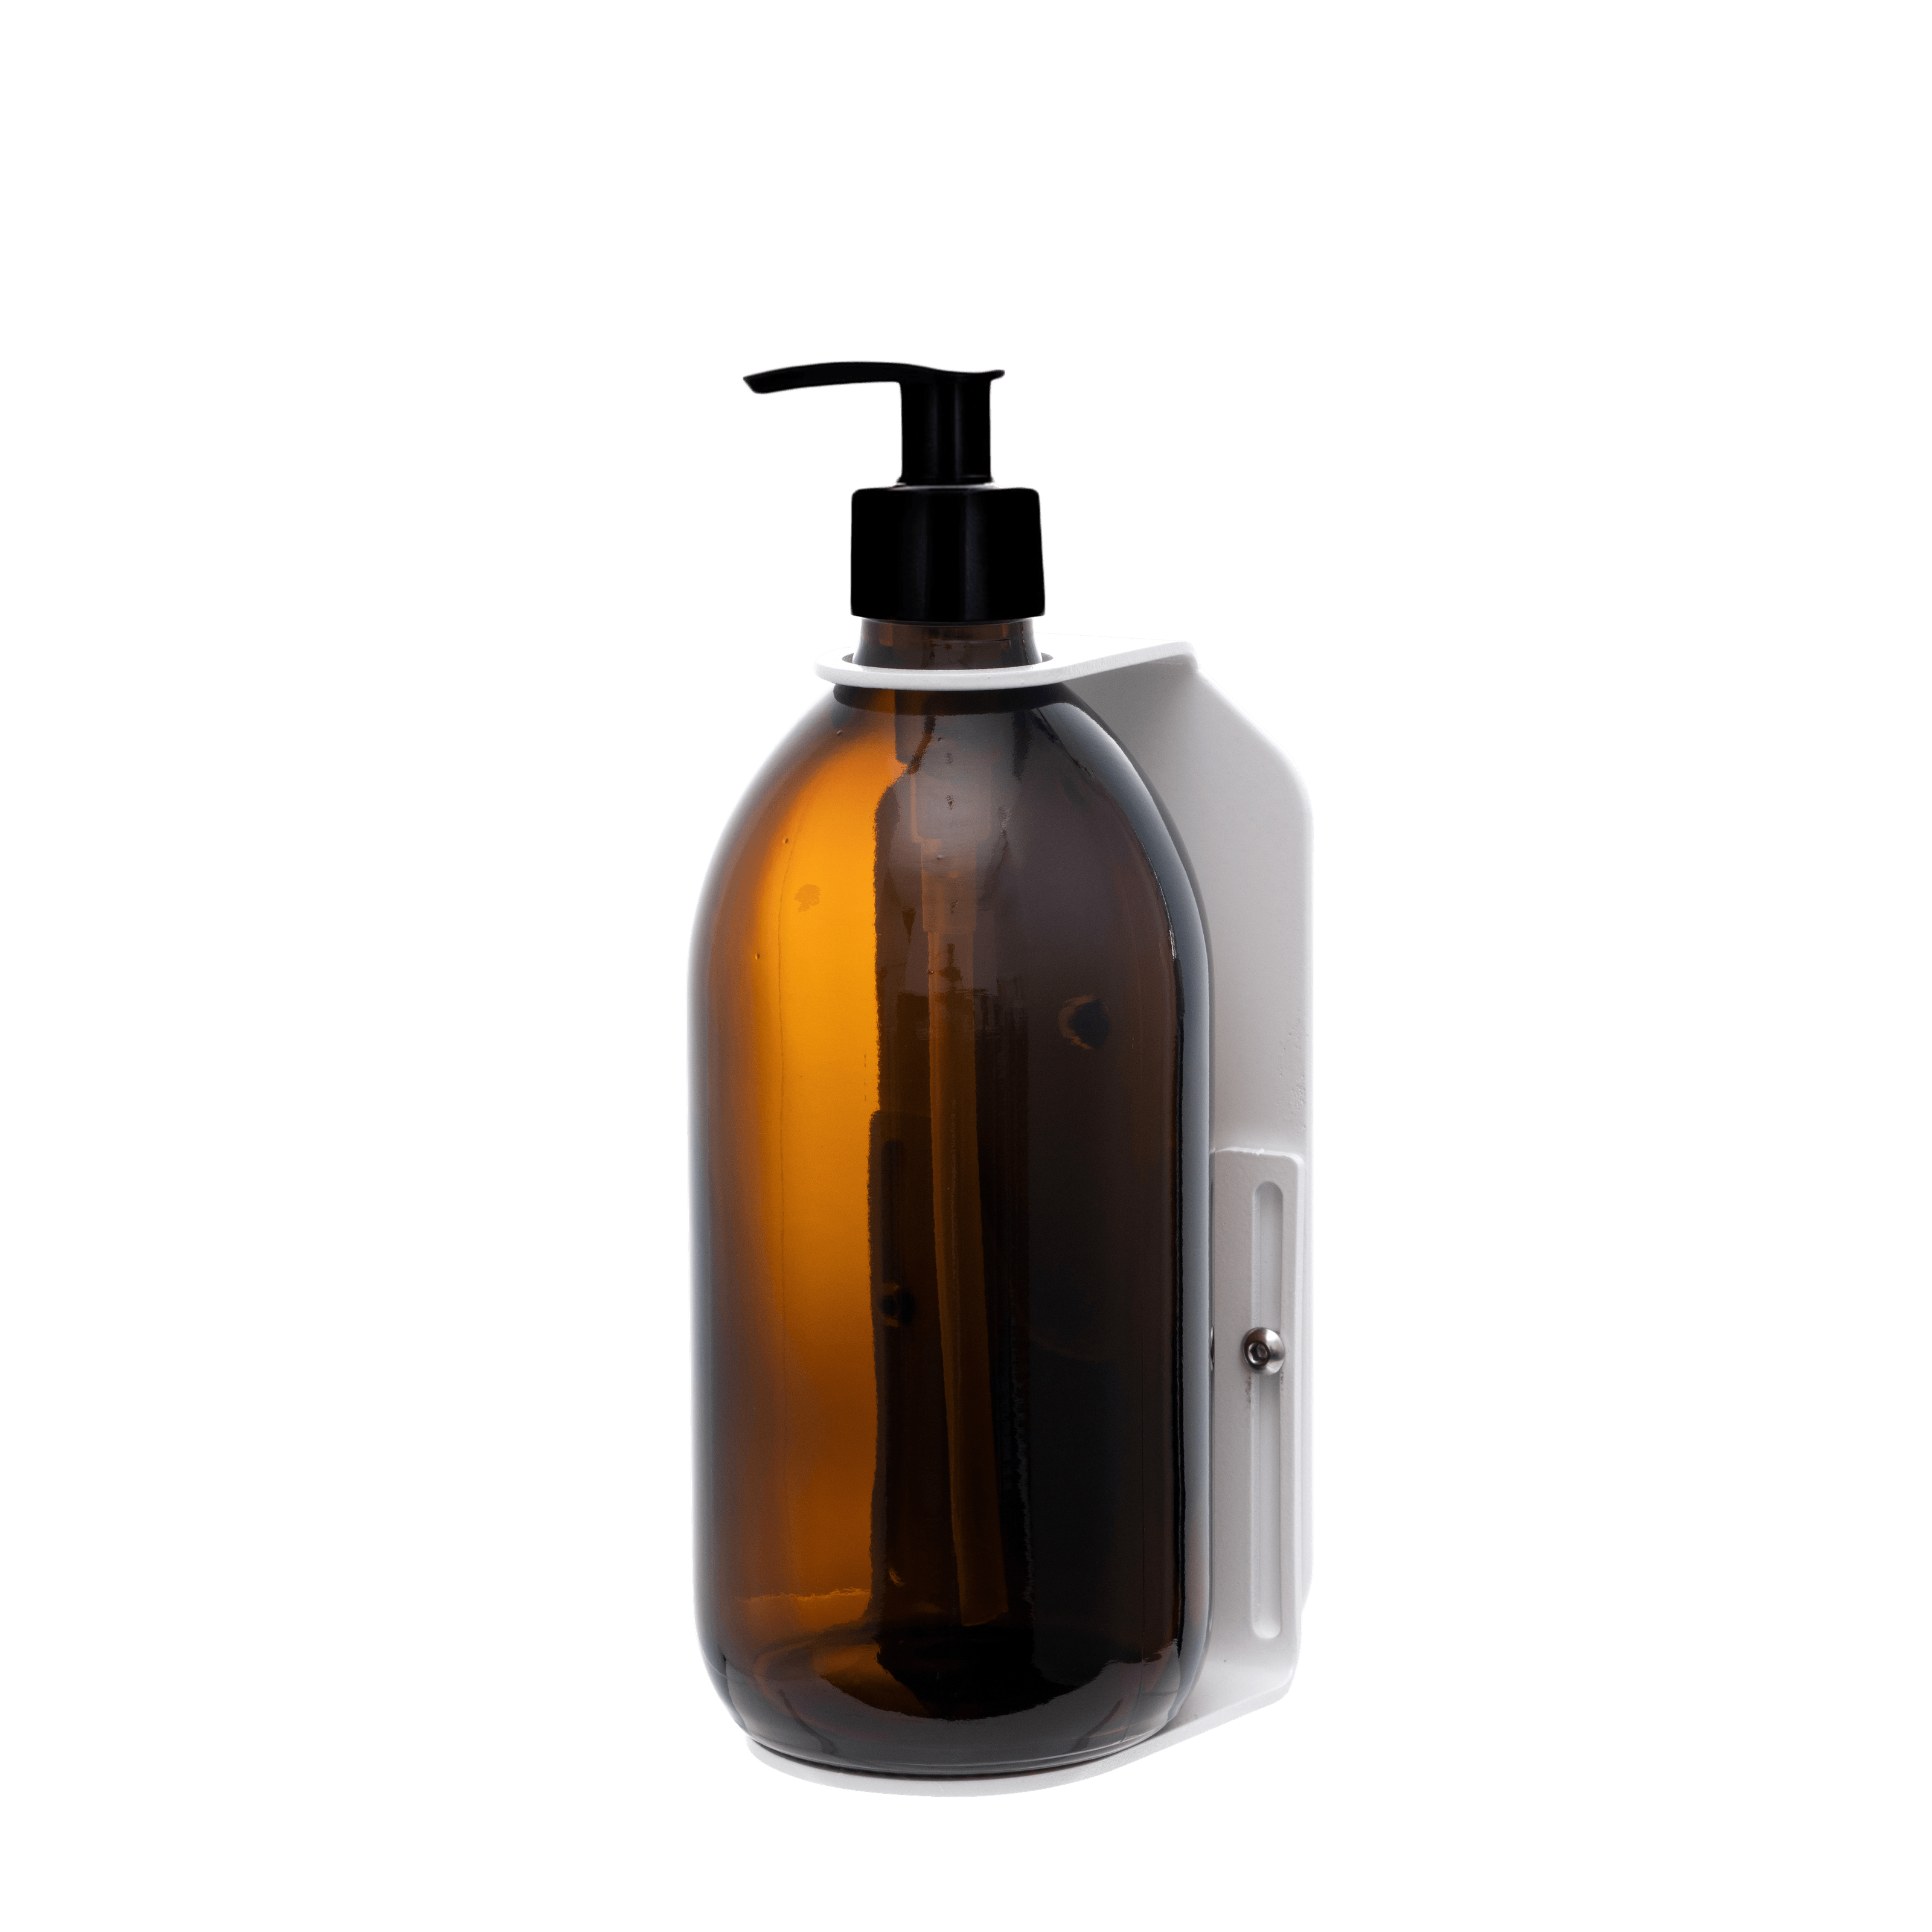 White Single Wall mounted Holder with 500ml Amber Bottles and Black Plastic Pump